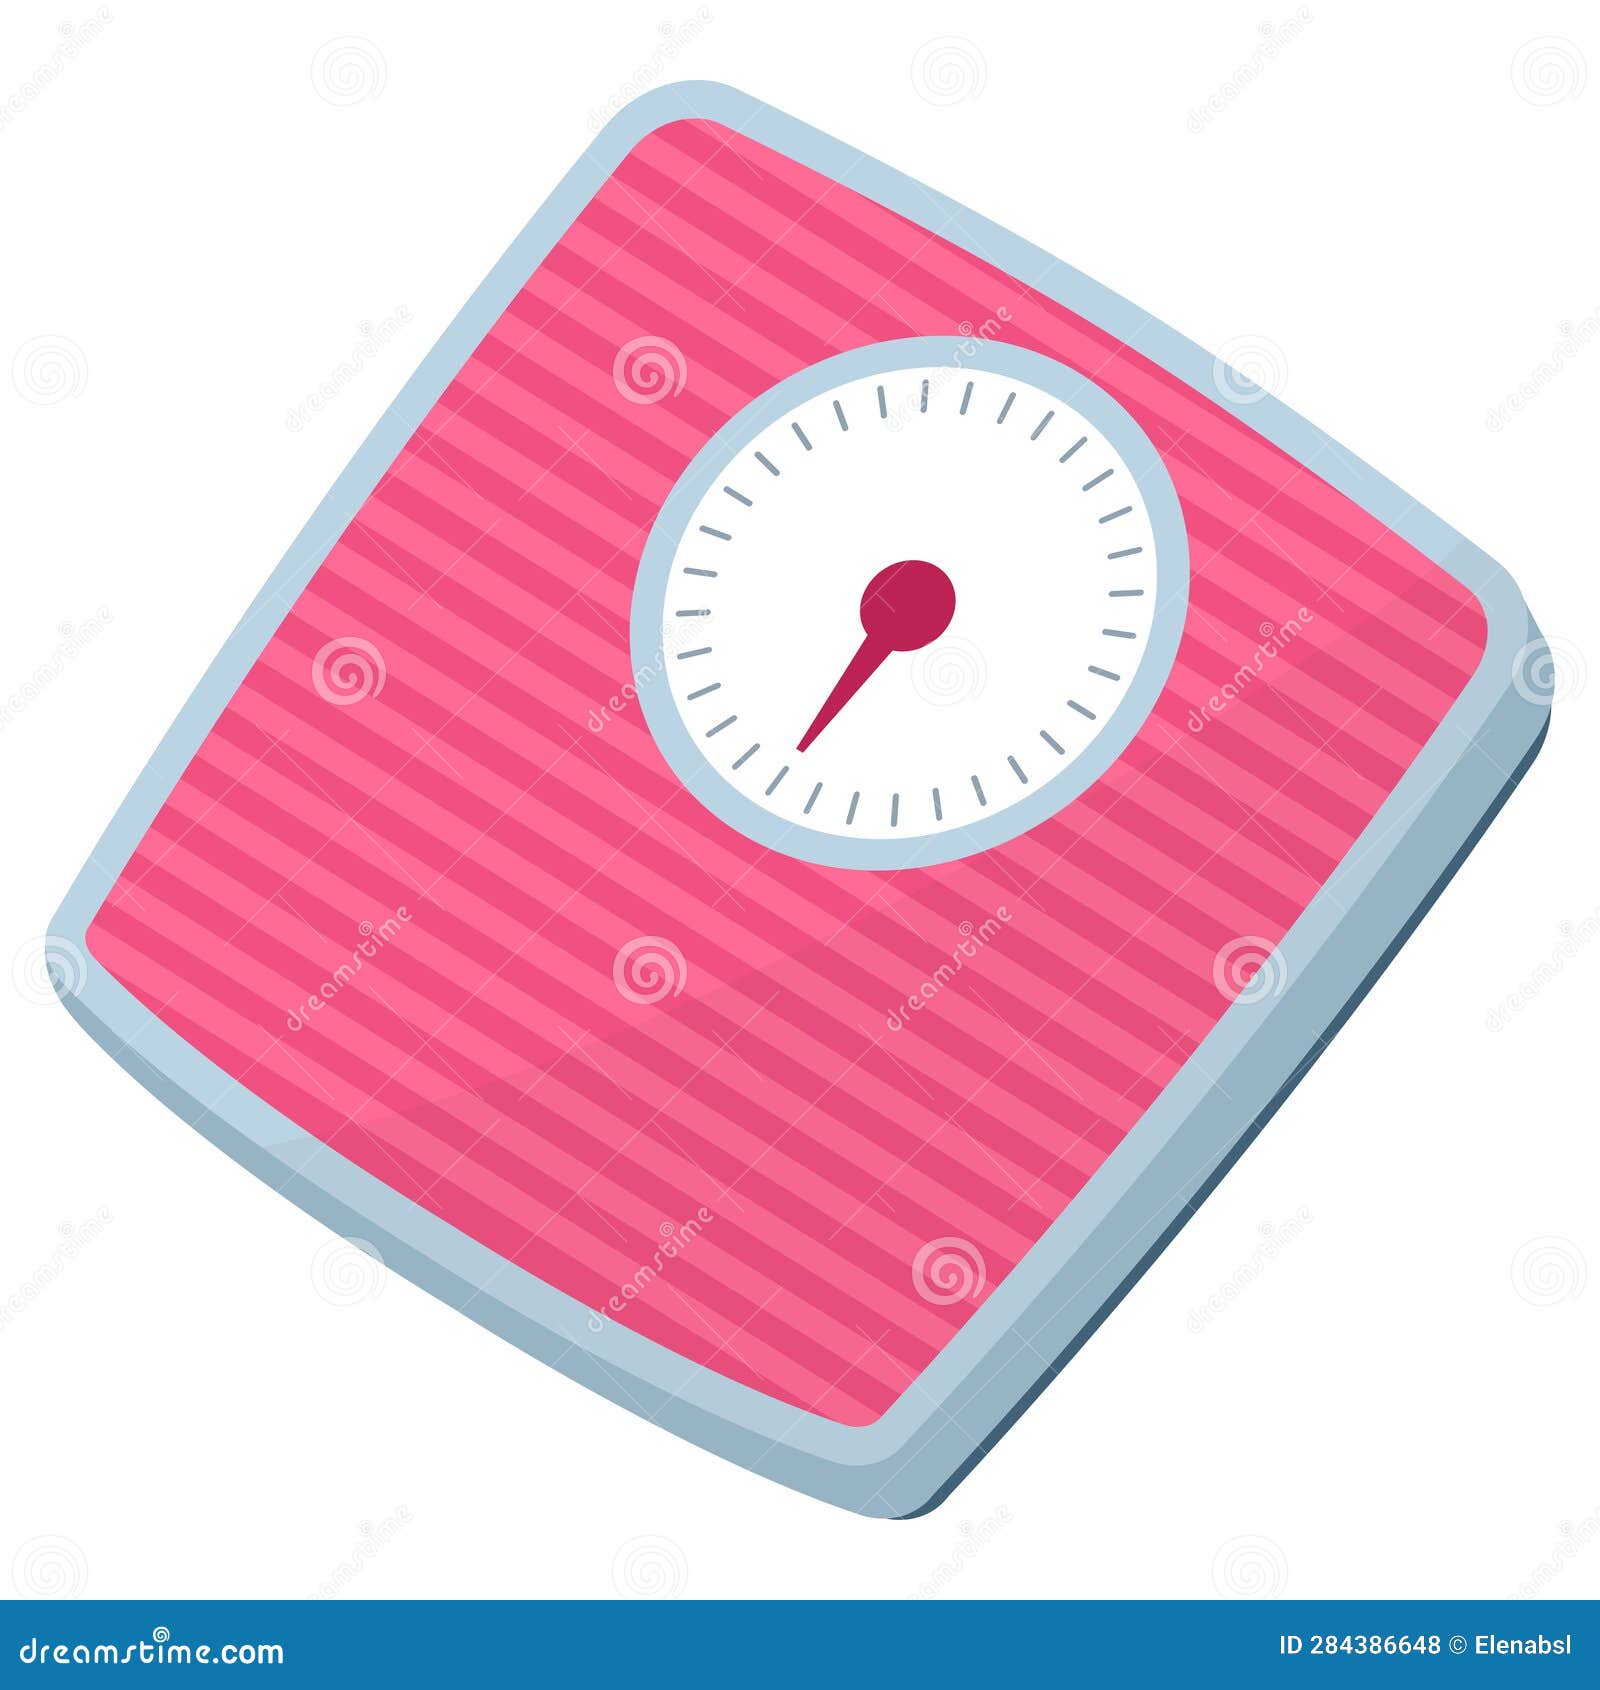 Measuring Scale Analog Weight Scale Isolated Stock Vector (Royalty